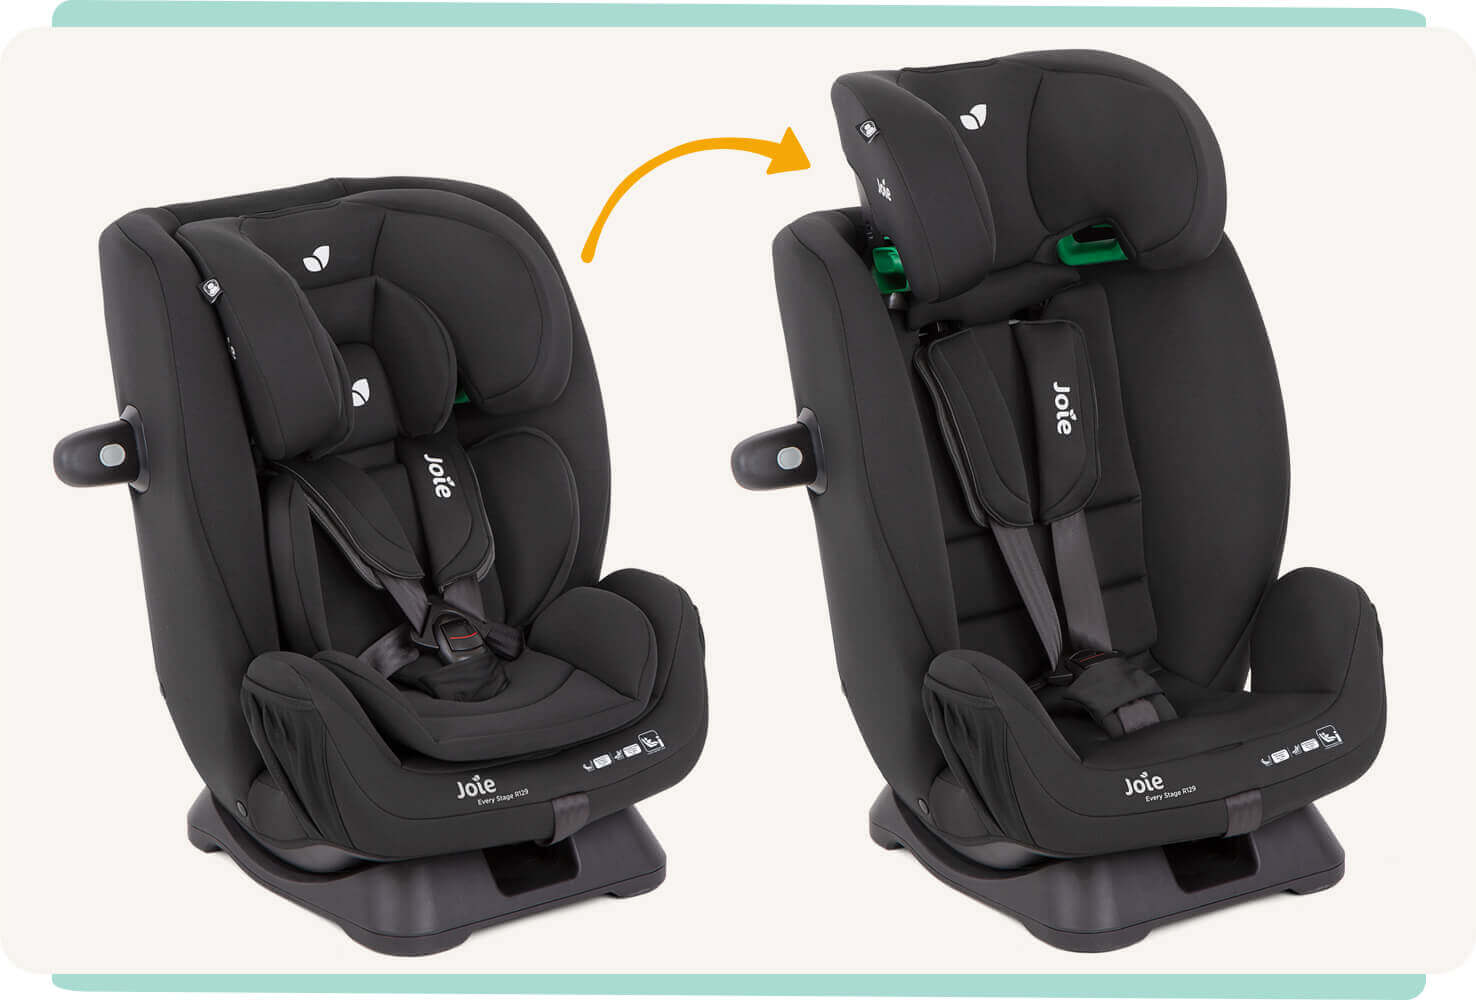 2 black Joie Every Stage R129 car seats side by side with an orange arrow pointing from left to right. The lefthand seat has headrest down and 5-point harness, and the righthand seat has headrest raised and no harness.